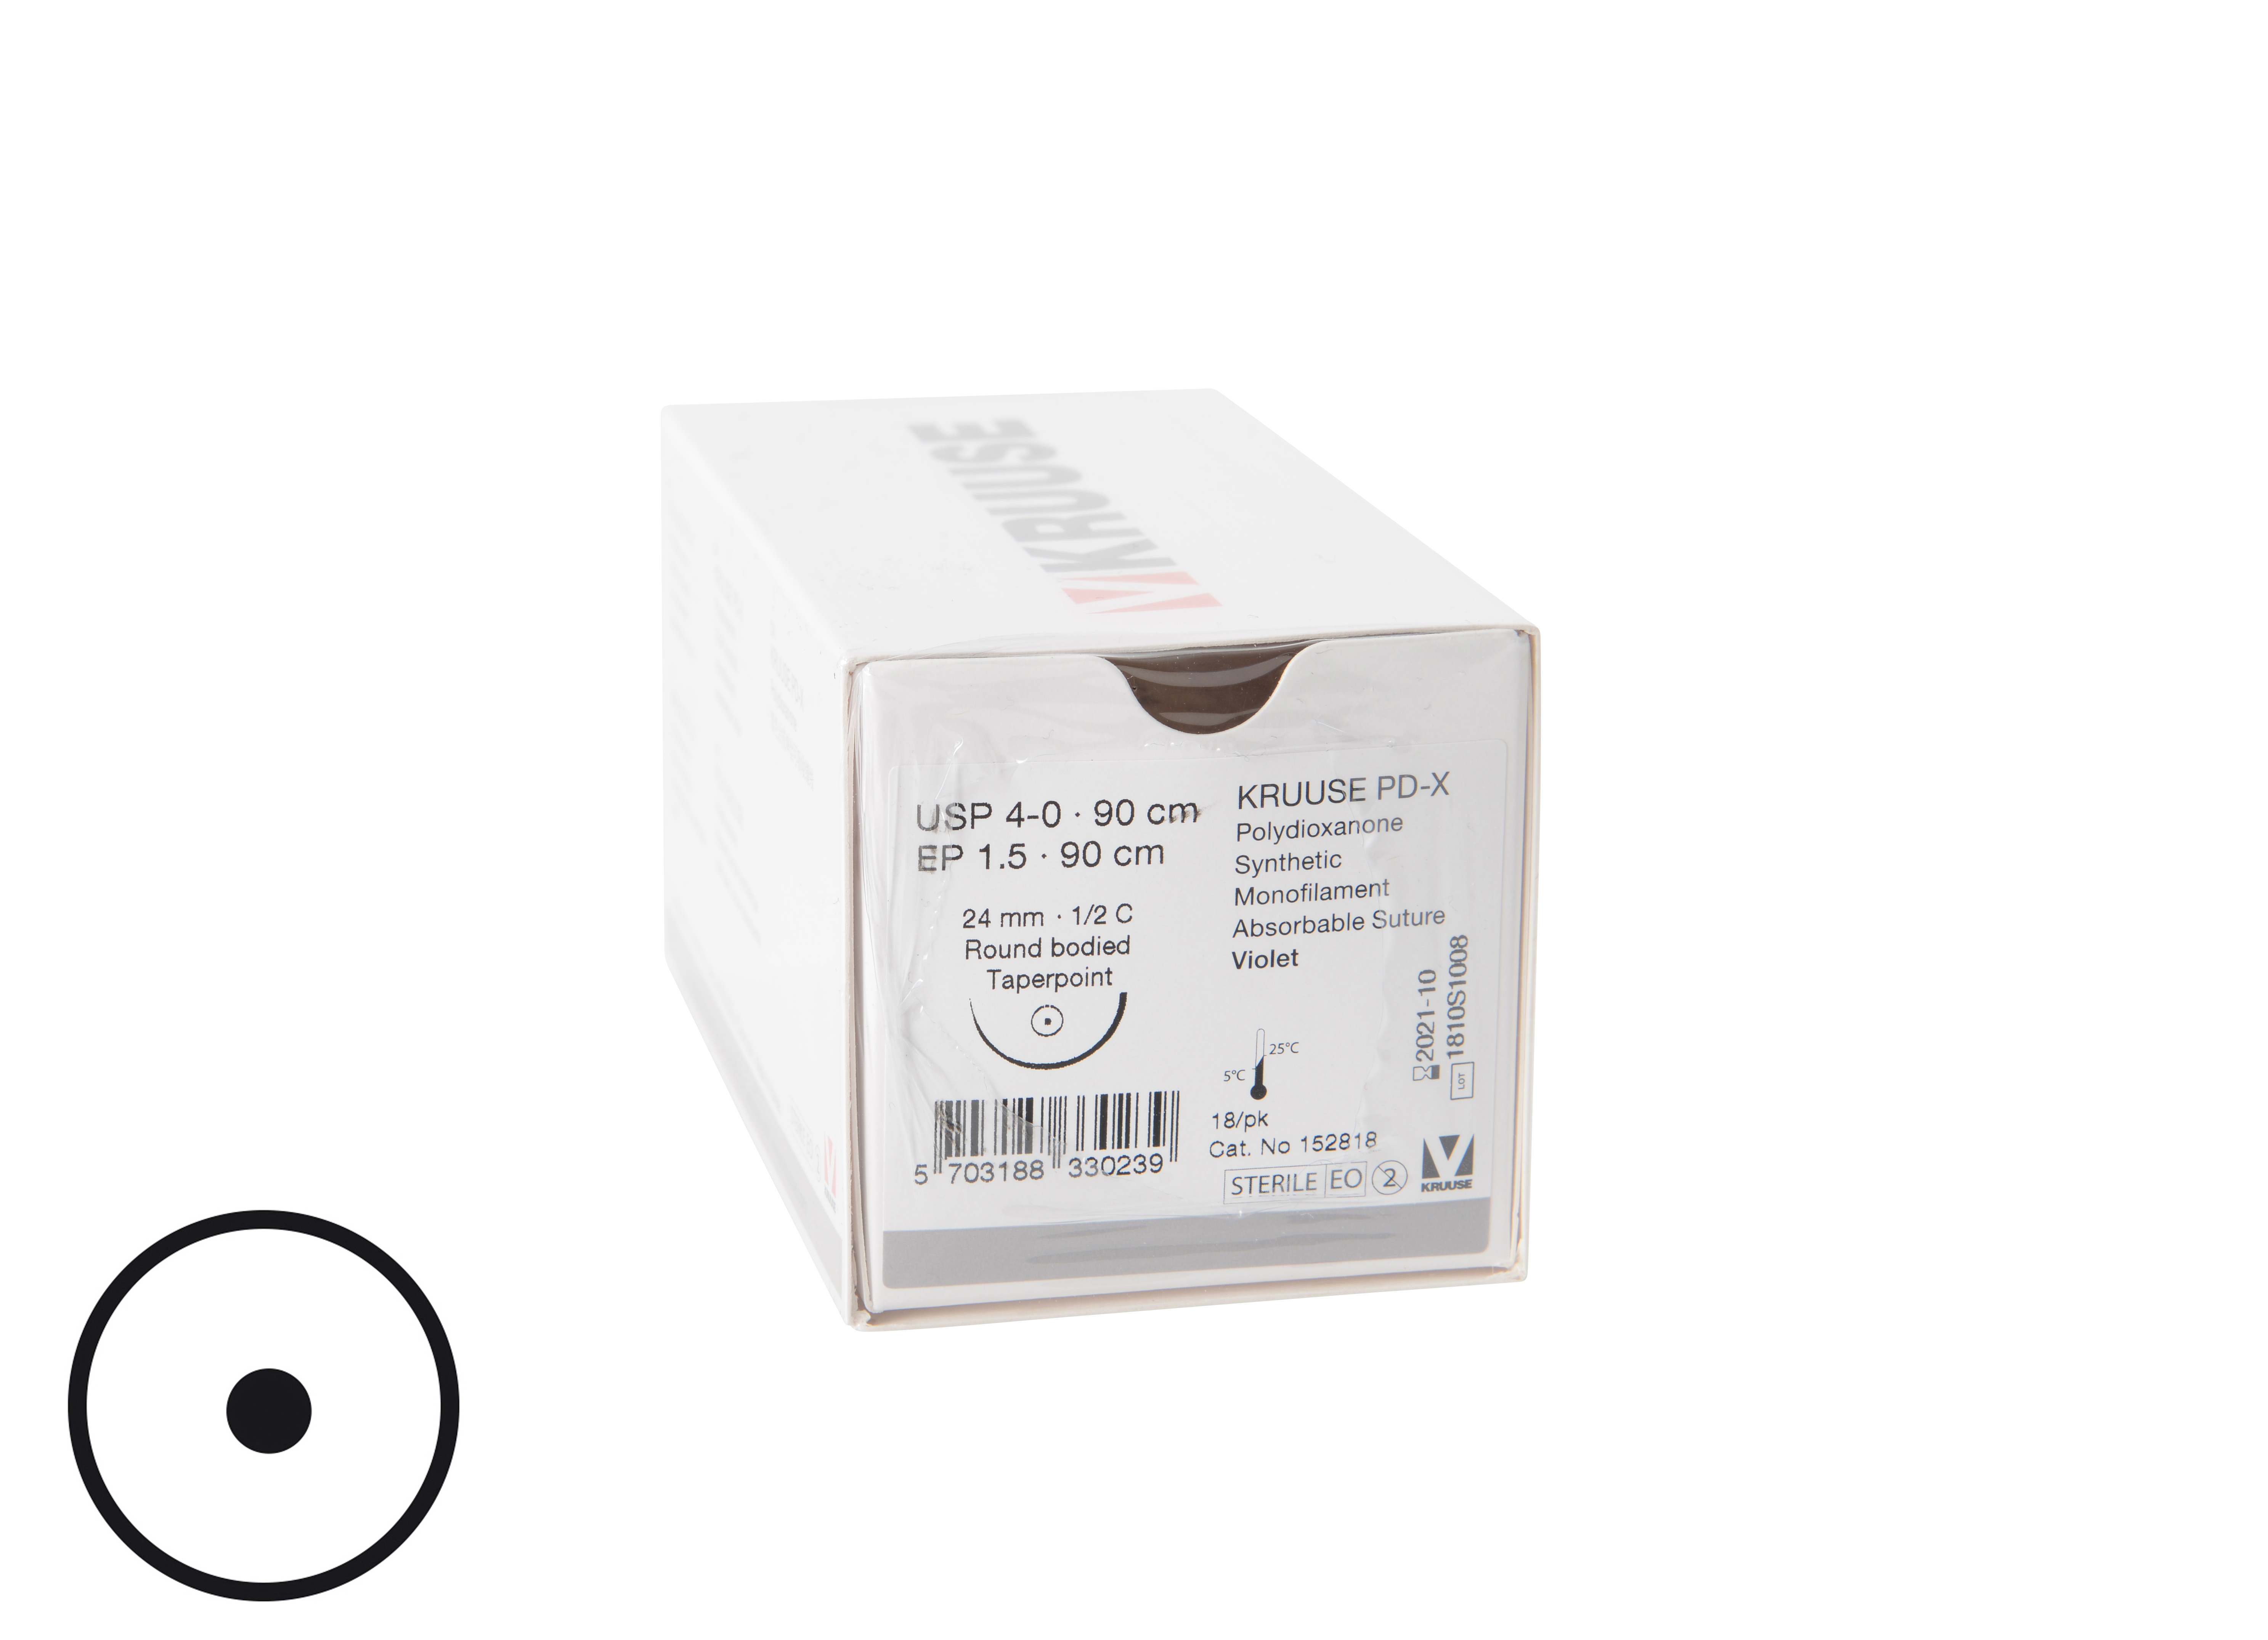 KRUUSE PD-X Suture, USP 4-0/EP 1.5, 90 cm, needle: 24 mm, ½ C, round bodied, taperpoint, 18/pk